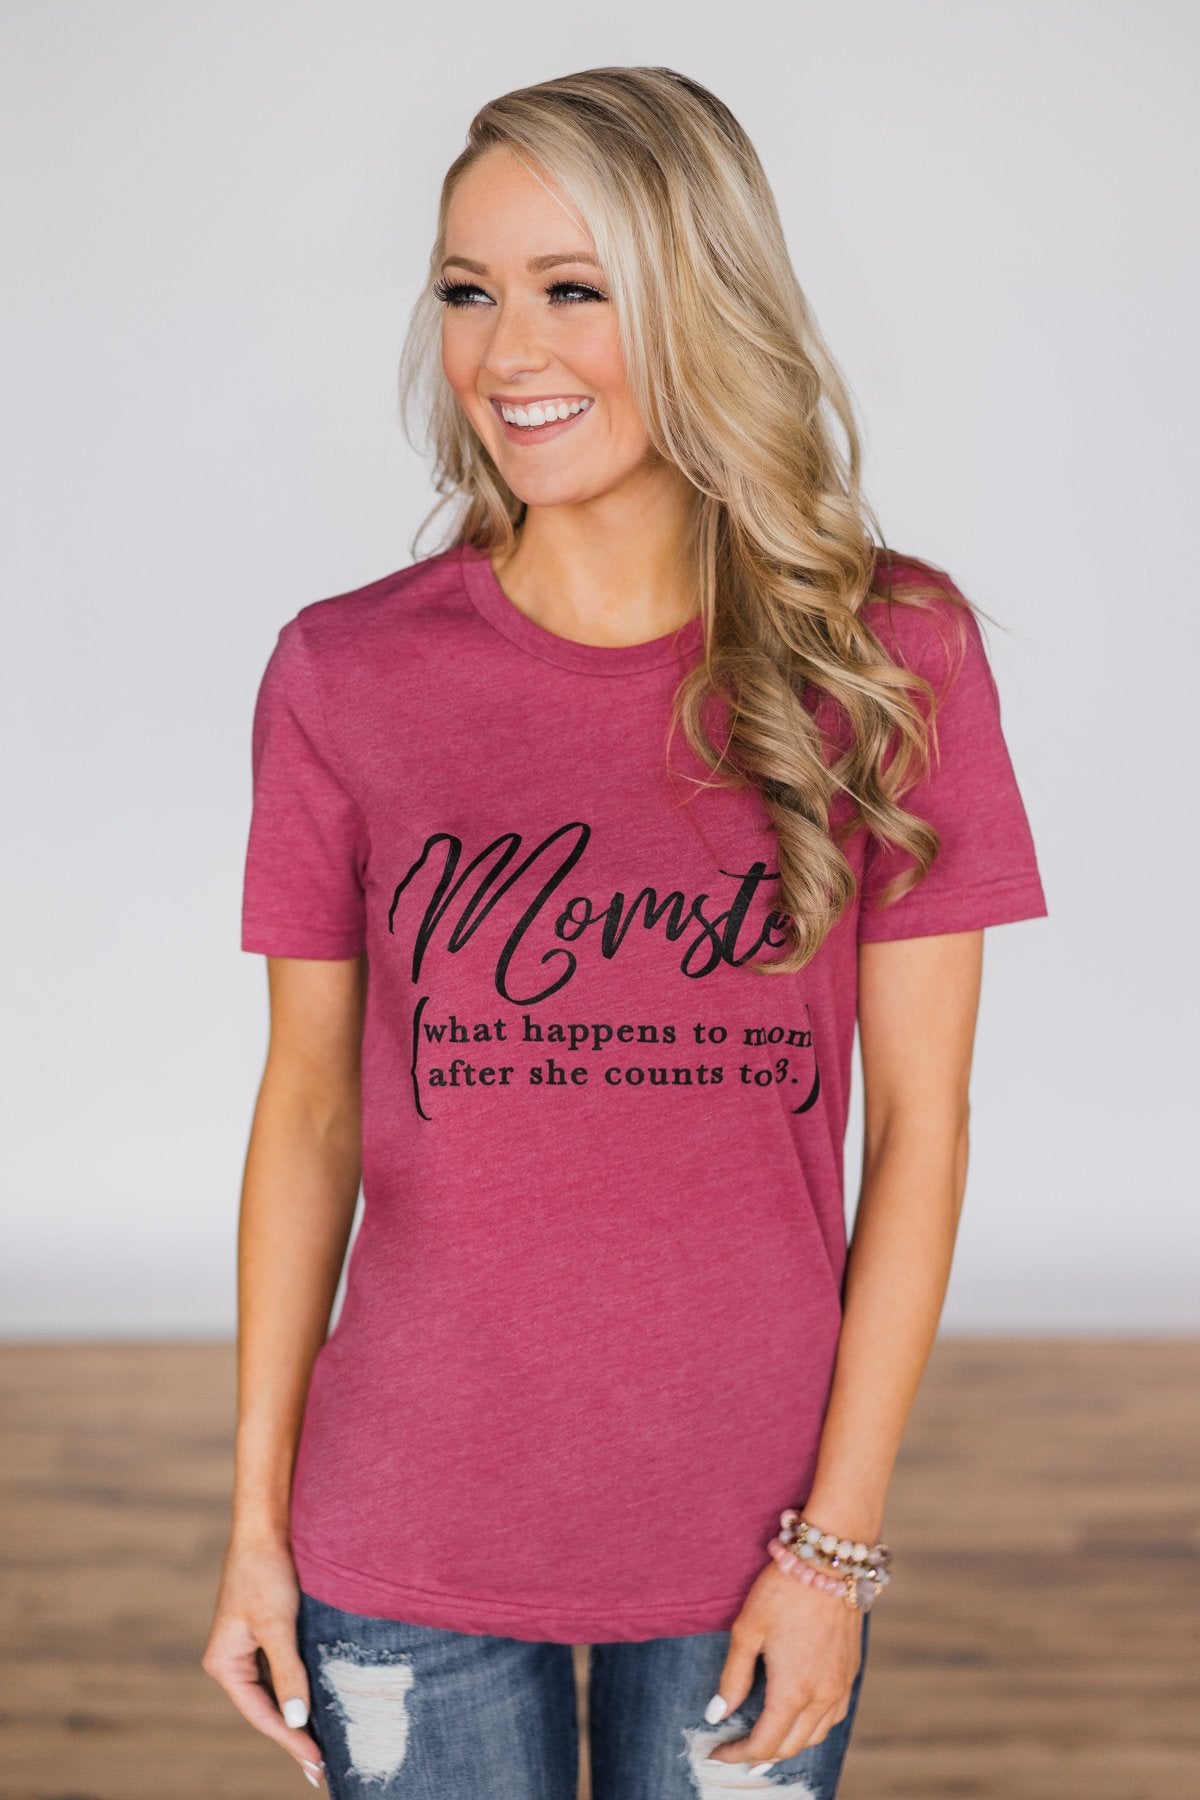 Momster Tee – The Pulse Boutique